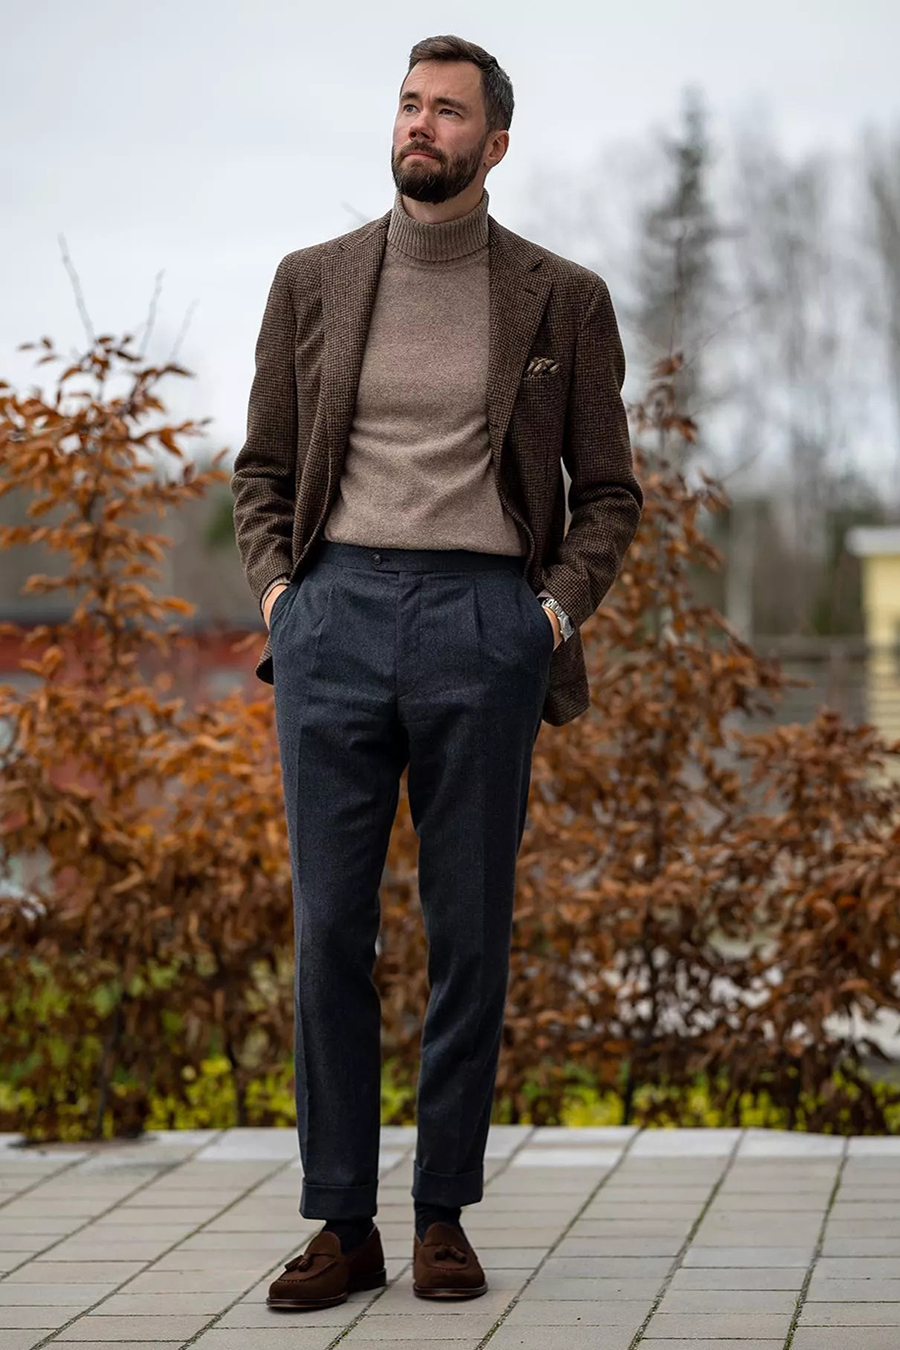 Brown tweed sport coat, brown turtleneck, navy dress pants, and brown suede loafers outfit